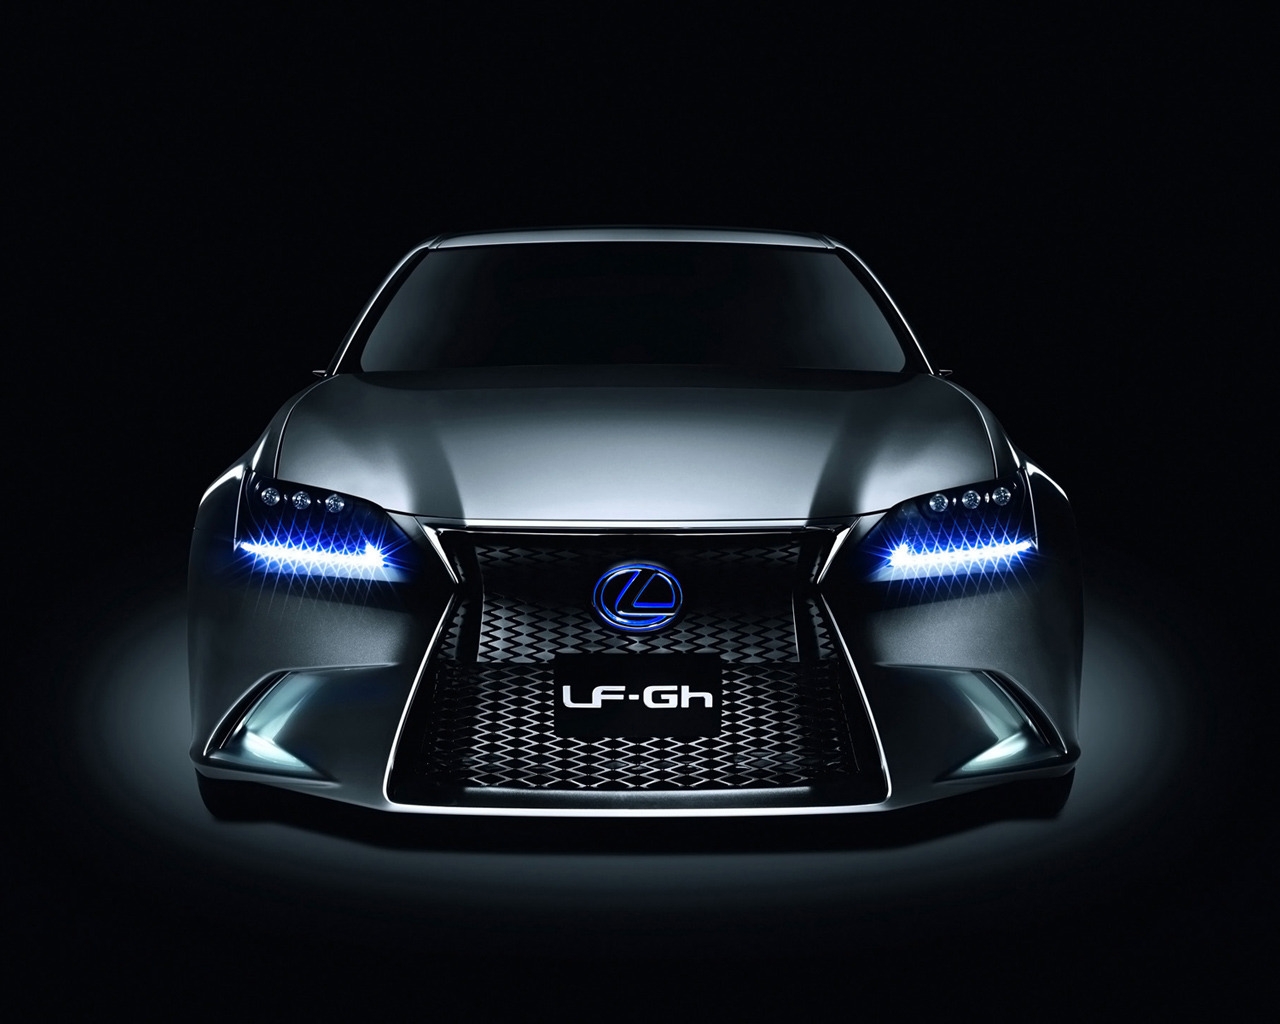 Lexus LF-Gh Hybrid Concept Front for 1280 x 1024 resolution